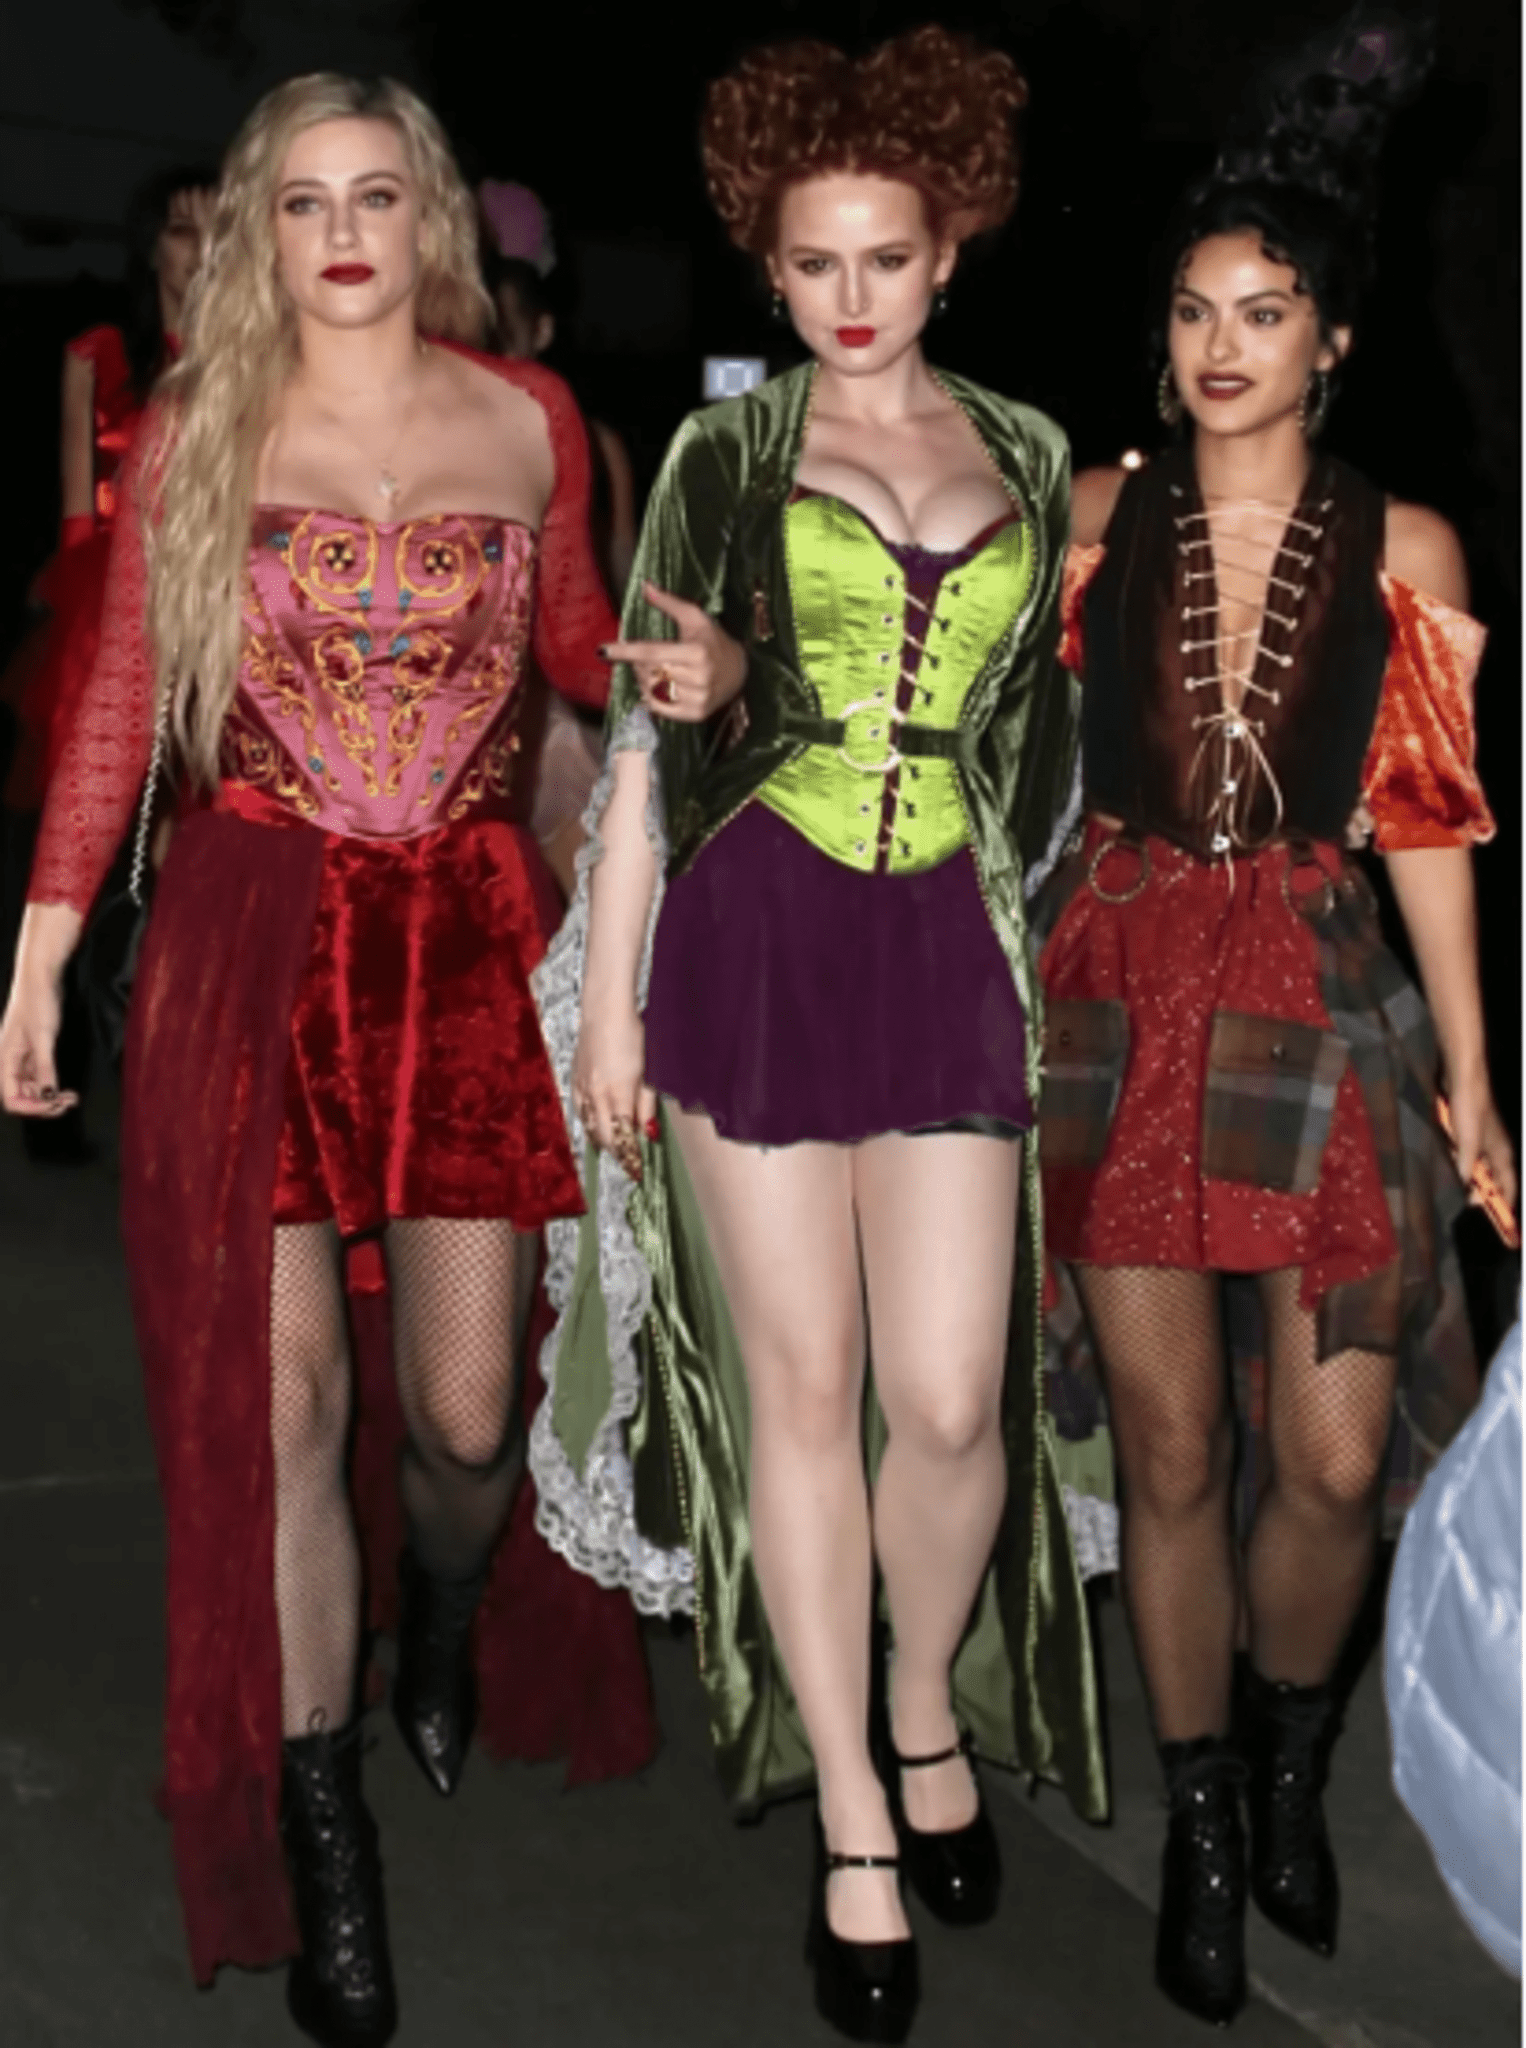 It's Halloween In Hollywood, And The Hocus Pocus Girls—Lili Reinhart, Camila Mendes, And Madelaine Petsch—Are Making An Appearance As The Unforgettable Witchy Trio